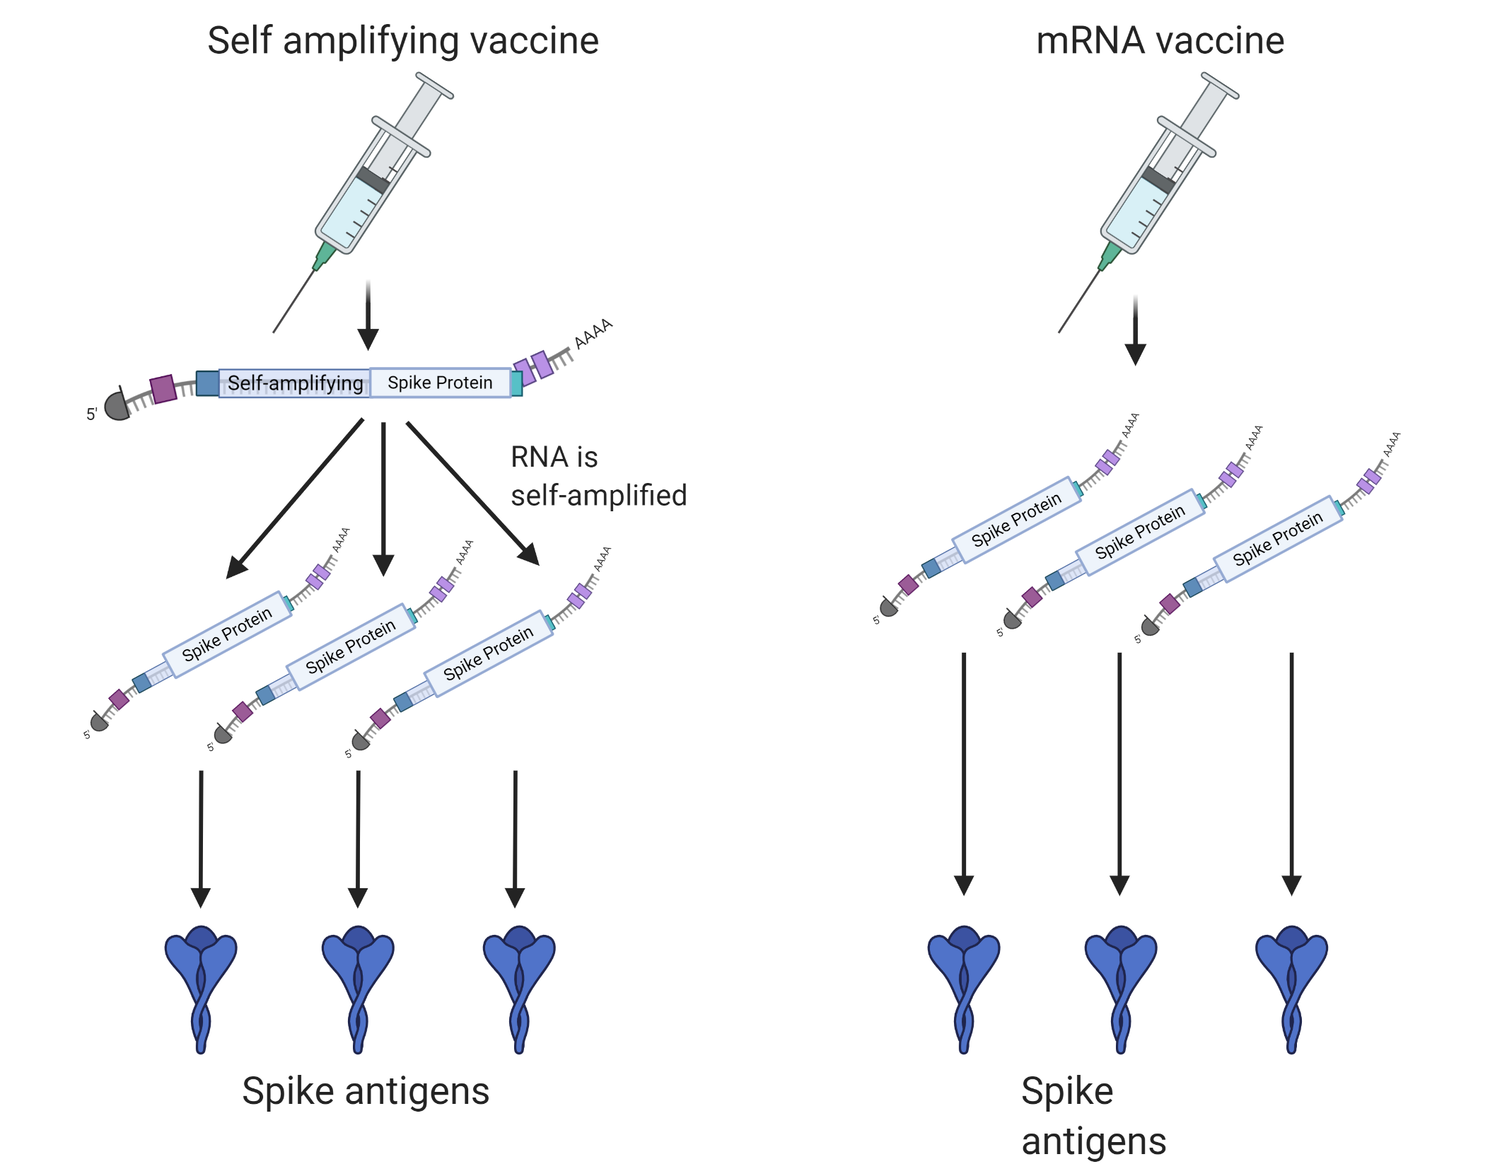 Self-amplifying and standard mRNA. Theoretically, lower doses are needed with self-amplifying RNA to generate the same antigen levels.